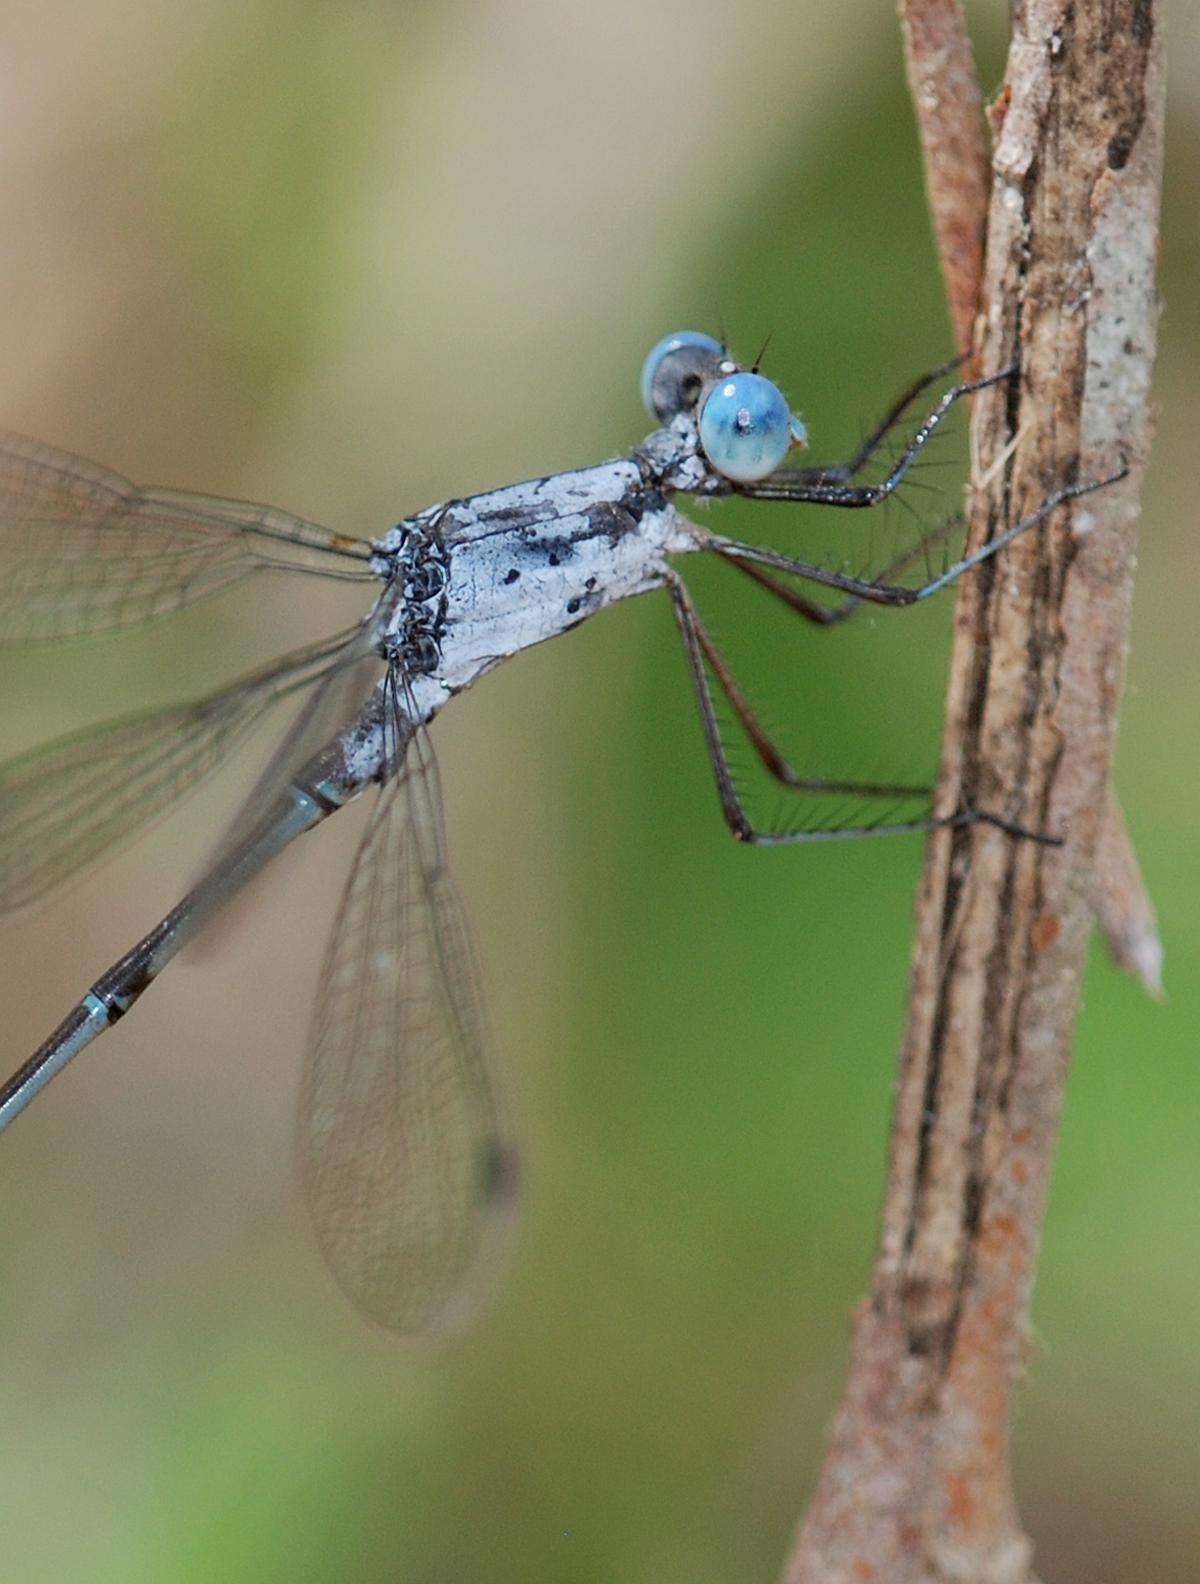 Chalky Spreadwing Photo by Robert Behrstock